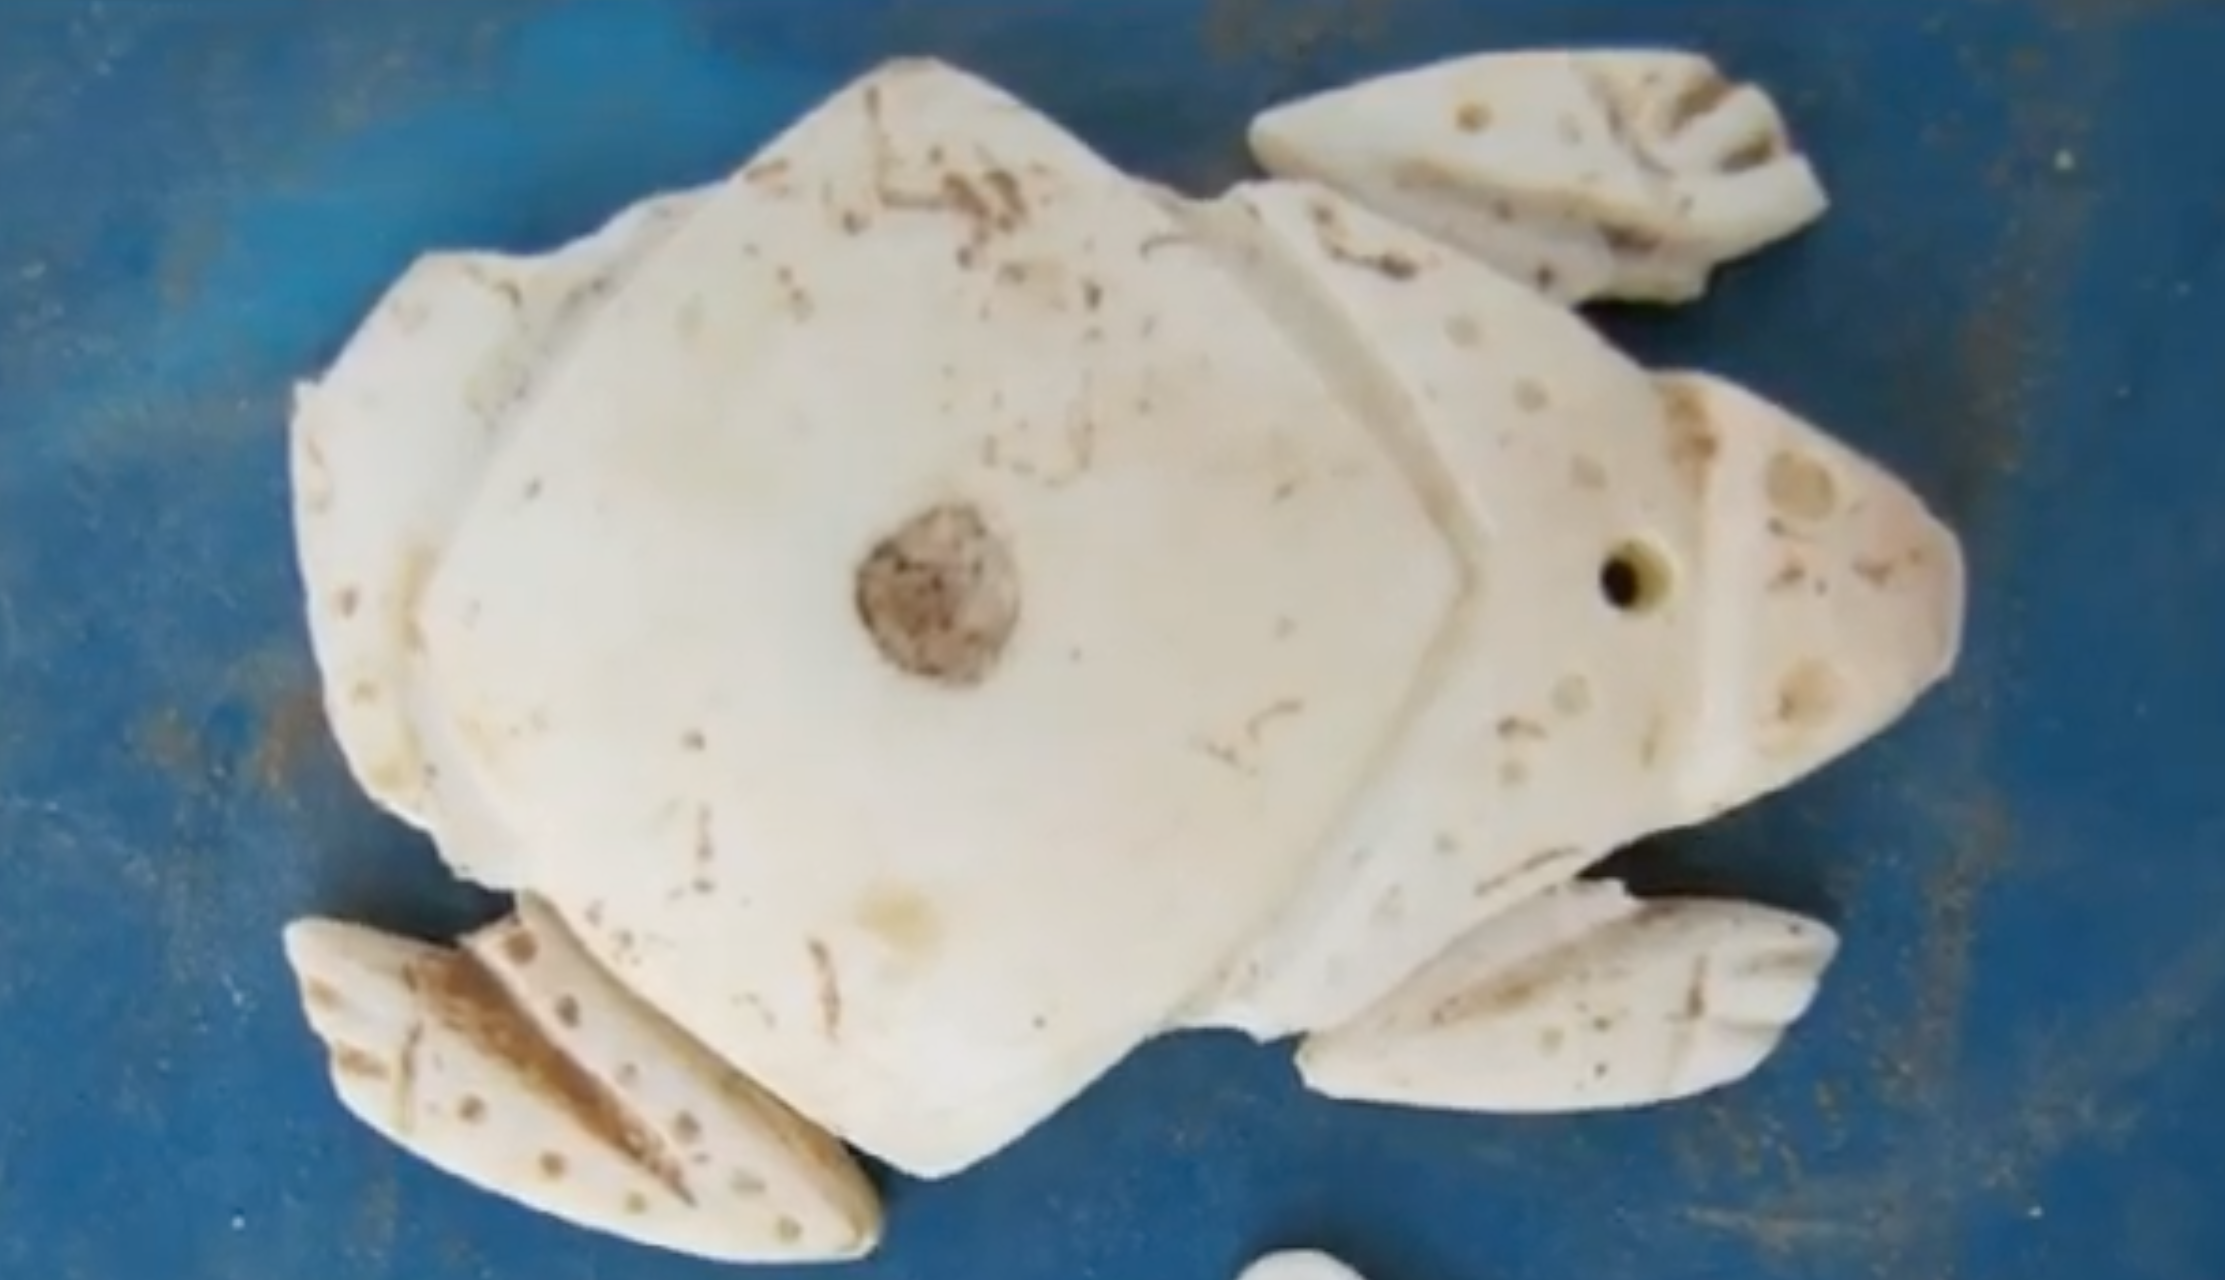 This artifact in the shape of a frog was found during the Main Street dig. (Screenshot from the Charlotte Amalie Saladoid Excavation documentary)